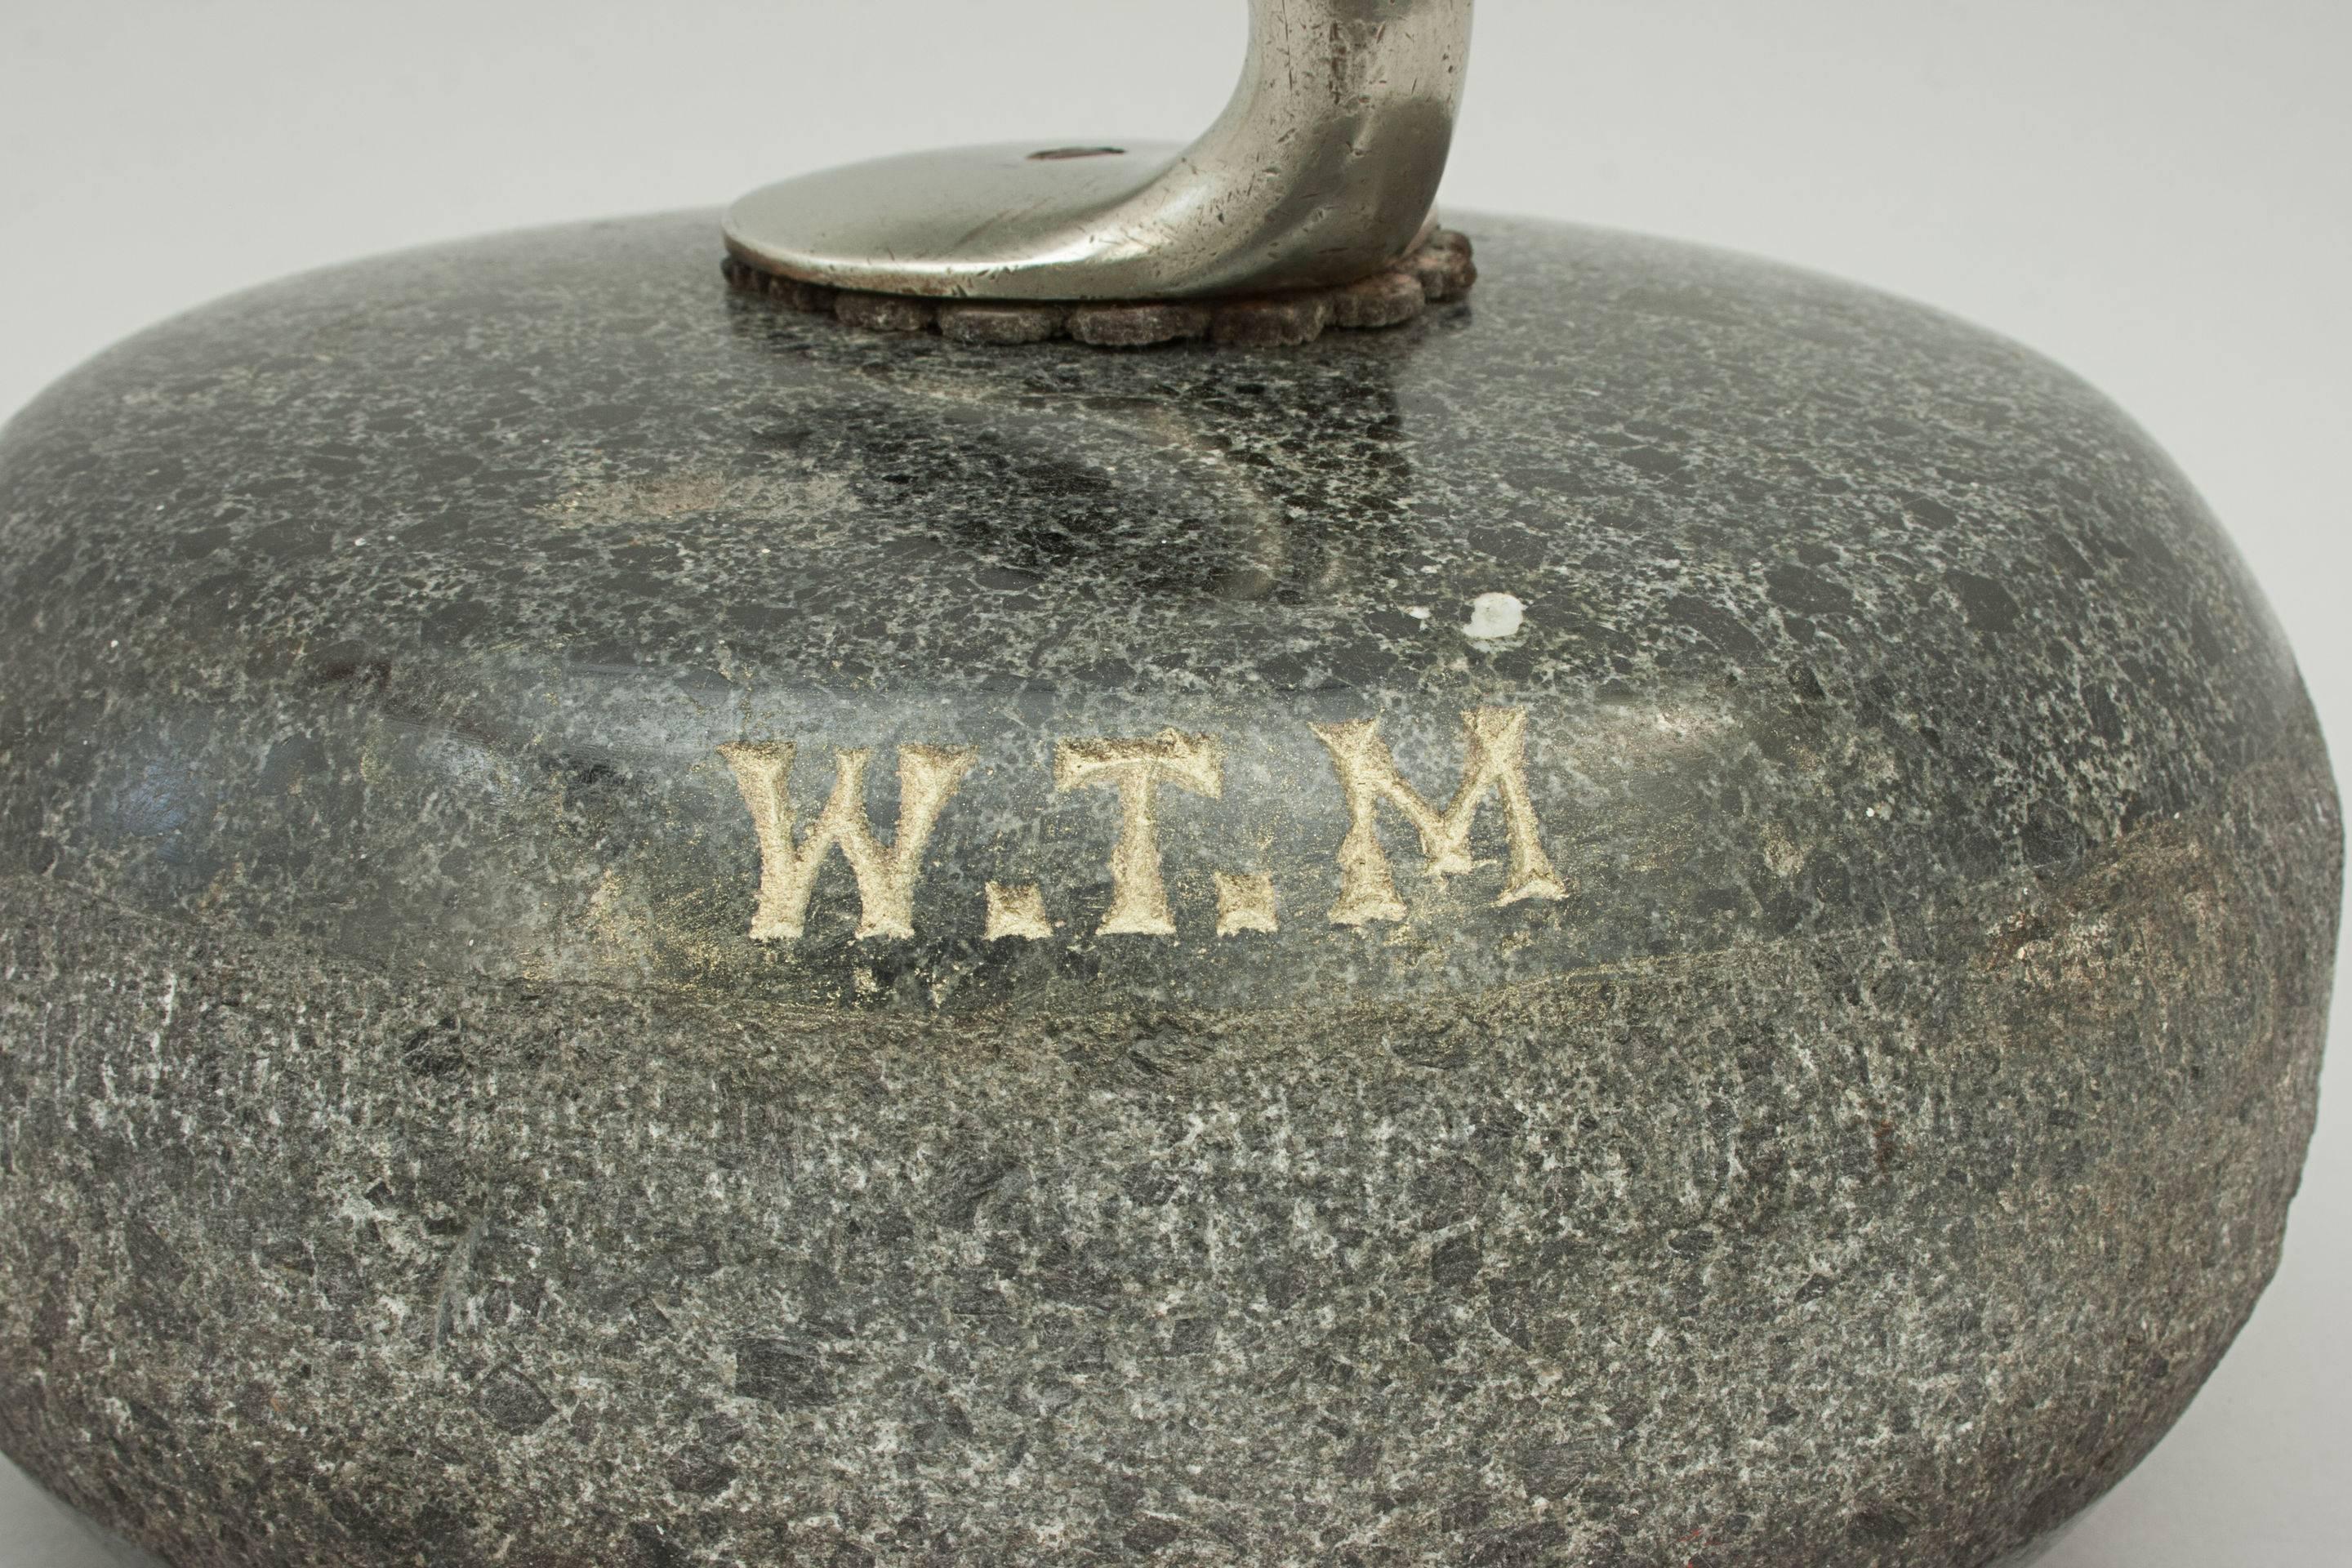 Early curling stone. 
A fine traditional double - soled granite curling stone with the owners initials W.T.M. chiselled into the stone. The stone is most probably made from granite from Ailsa Craig by Turnberry, Scotland and has a plated one-piece